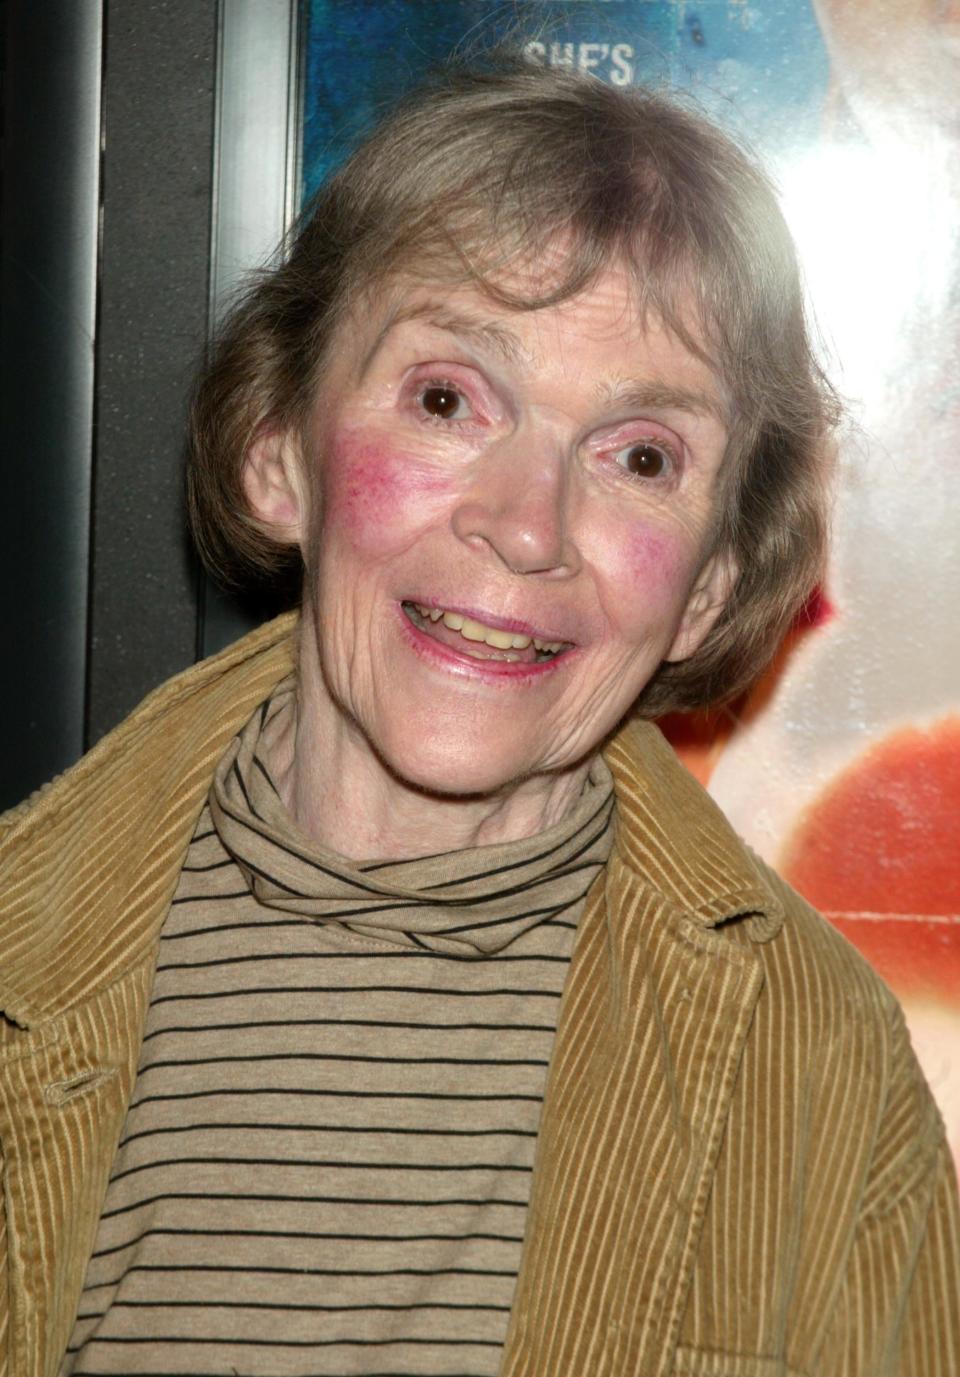 Alice Drummond, an actress who was a Broadway regular in the 1960s and 1970s then played an array of older women in blockbuster films like &ldquo;Ghostbusters,&rdquo; &ldquo;Awakenings&rdquo; and &ldquo;Doubt,&rdquo; died on Nov.30, 2016. She was 88.